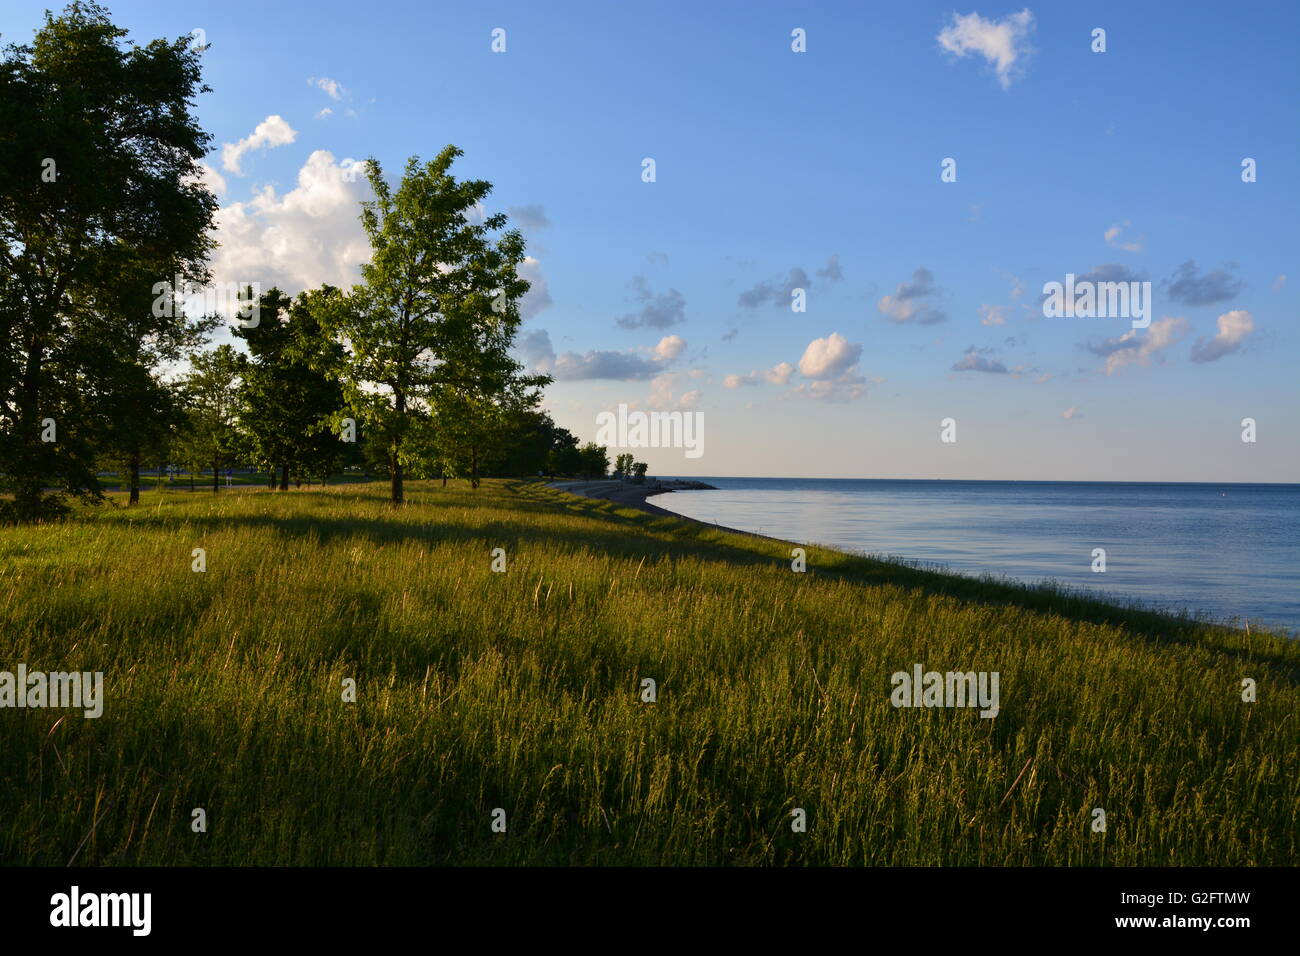 Lake Michigan shoreline park at sunset from the Hyde Park neighborhood on Chicago's south side. Stock Photo